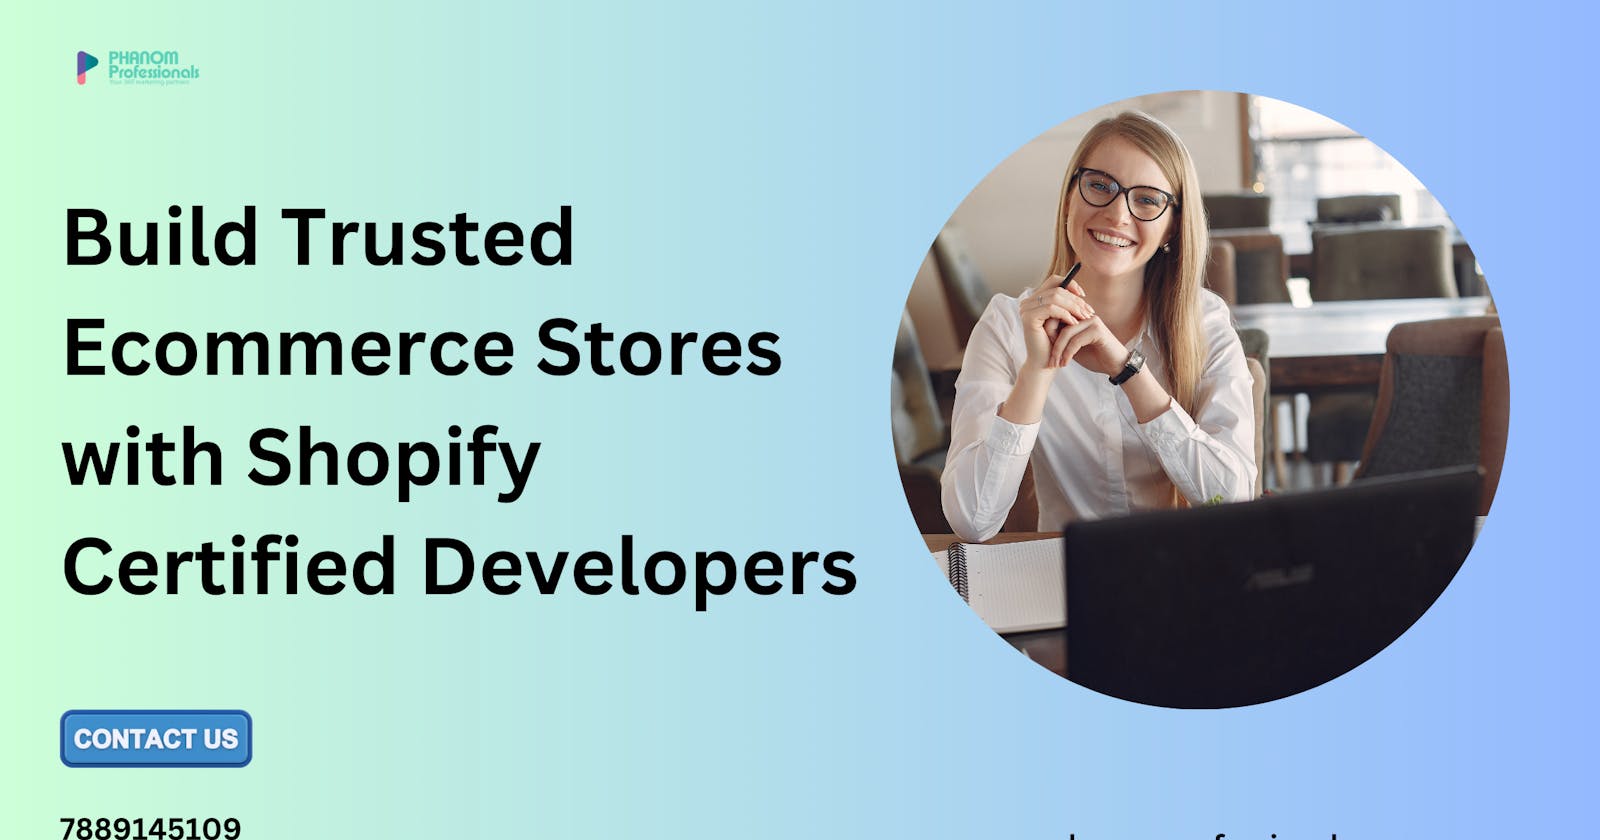 Build Trusted Ecommerce Stores with Shopify Certified Developers